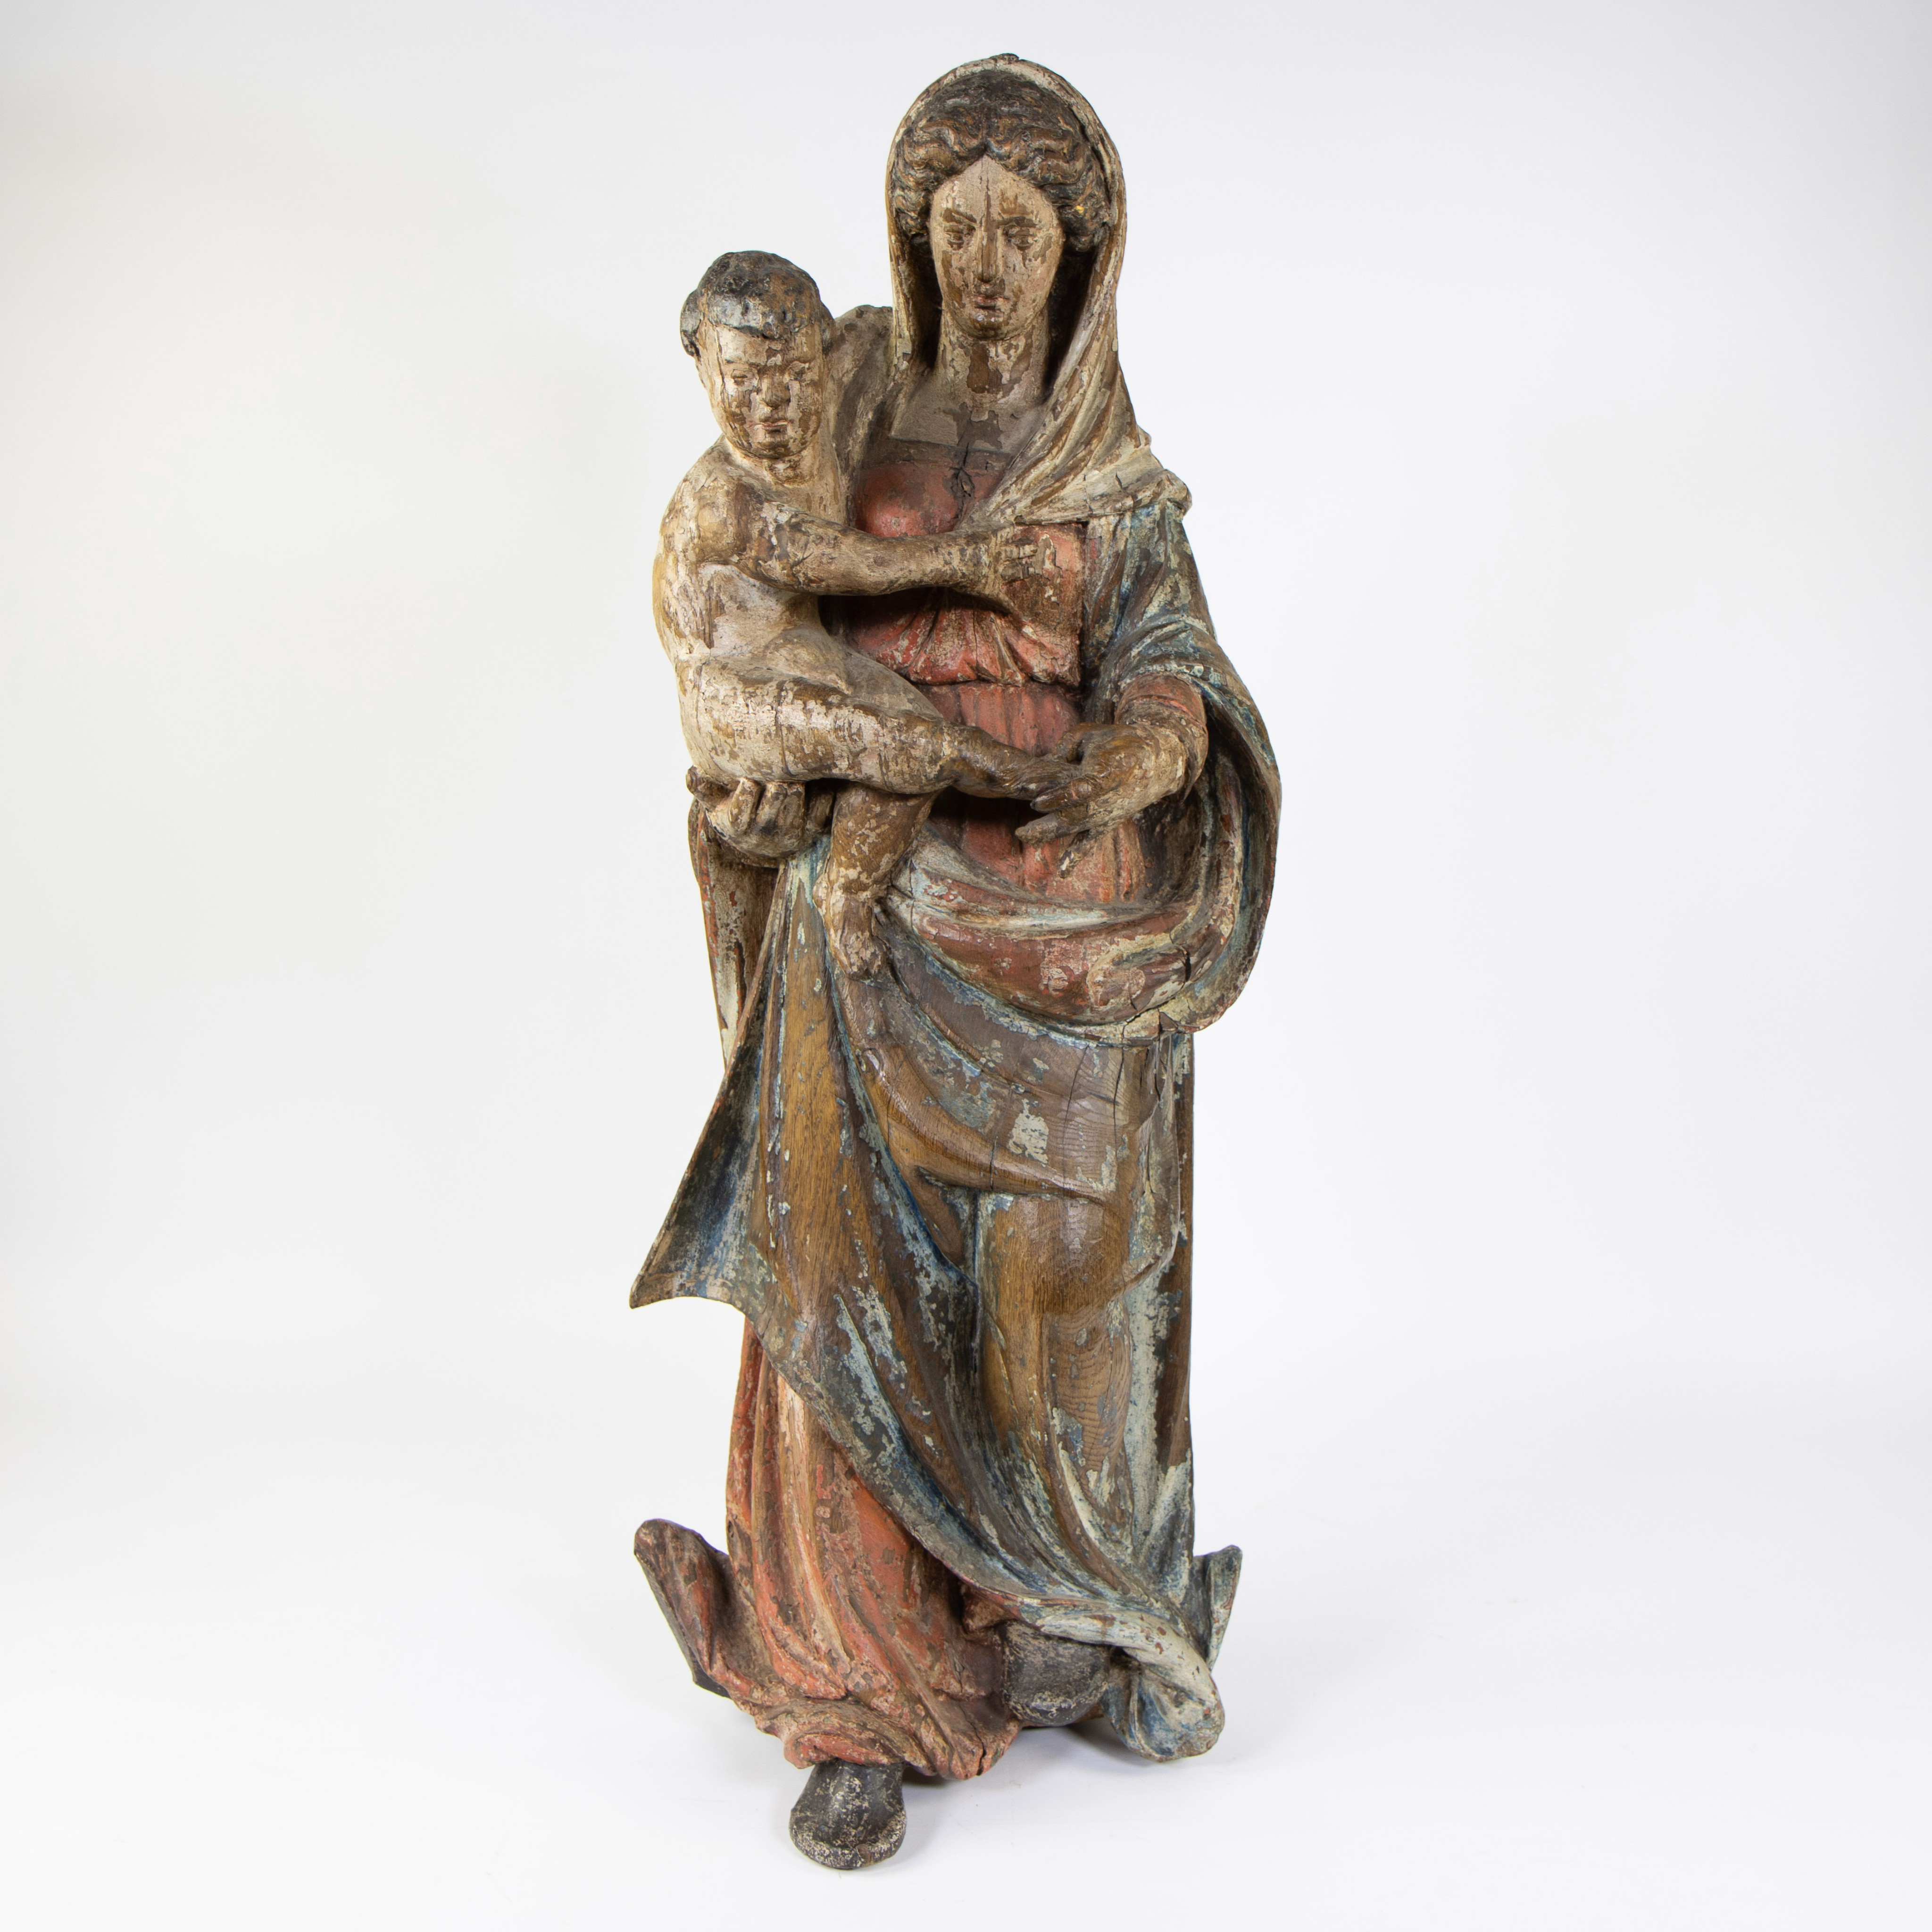 Wooden statue of Madonna with child Jesus, original polychromy, late 17th early 18th century